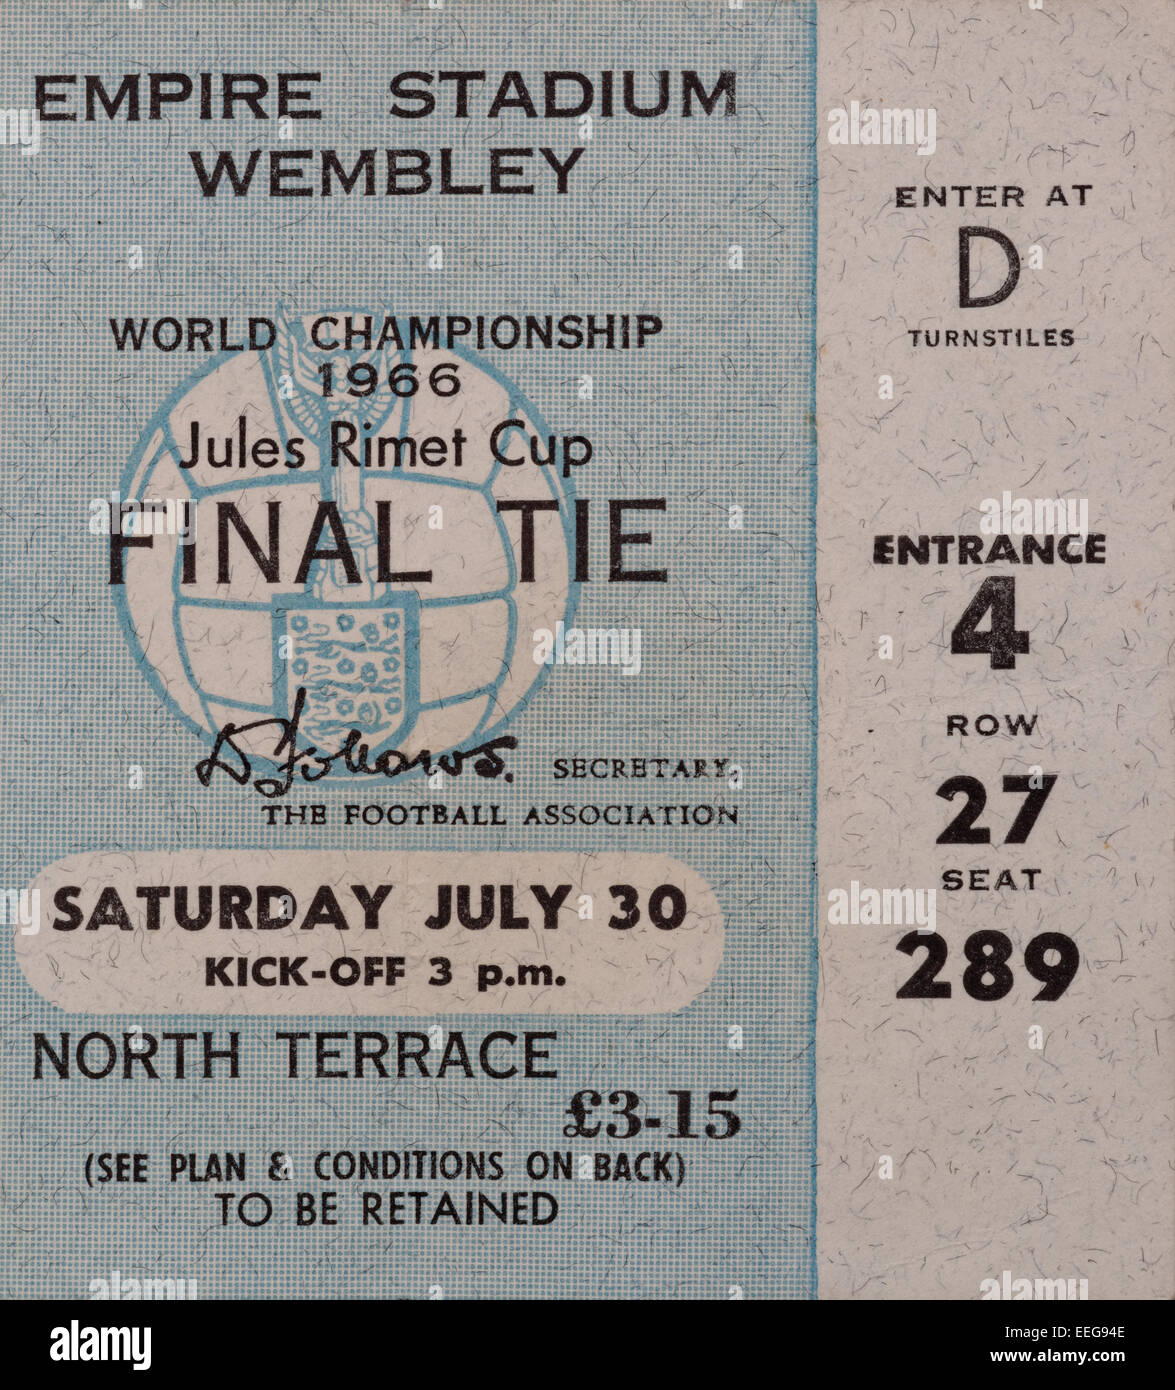 World Cup Final 1966 England v West Germany ticket for the Jules Rimet Cup. Stock Photo